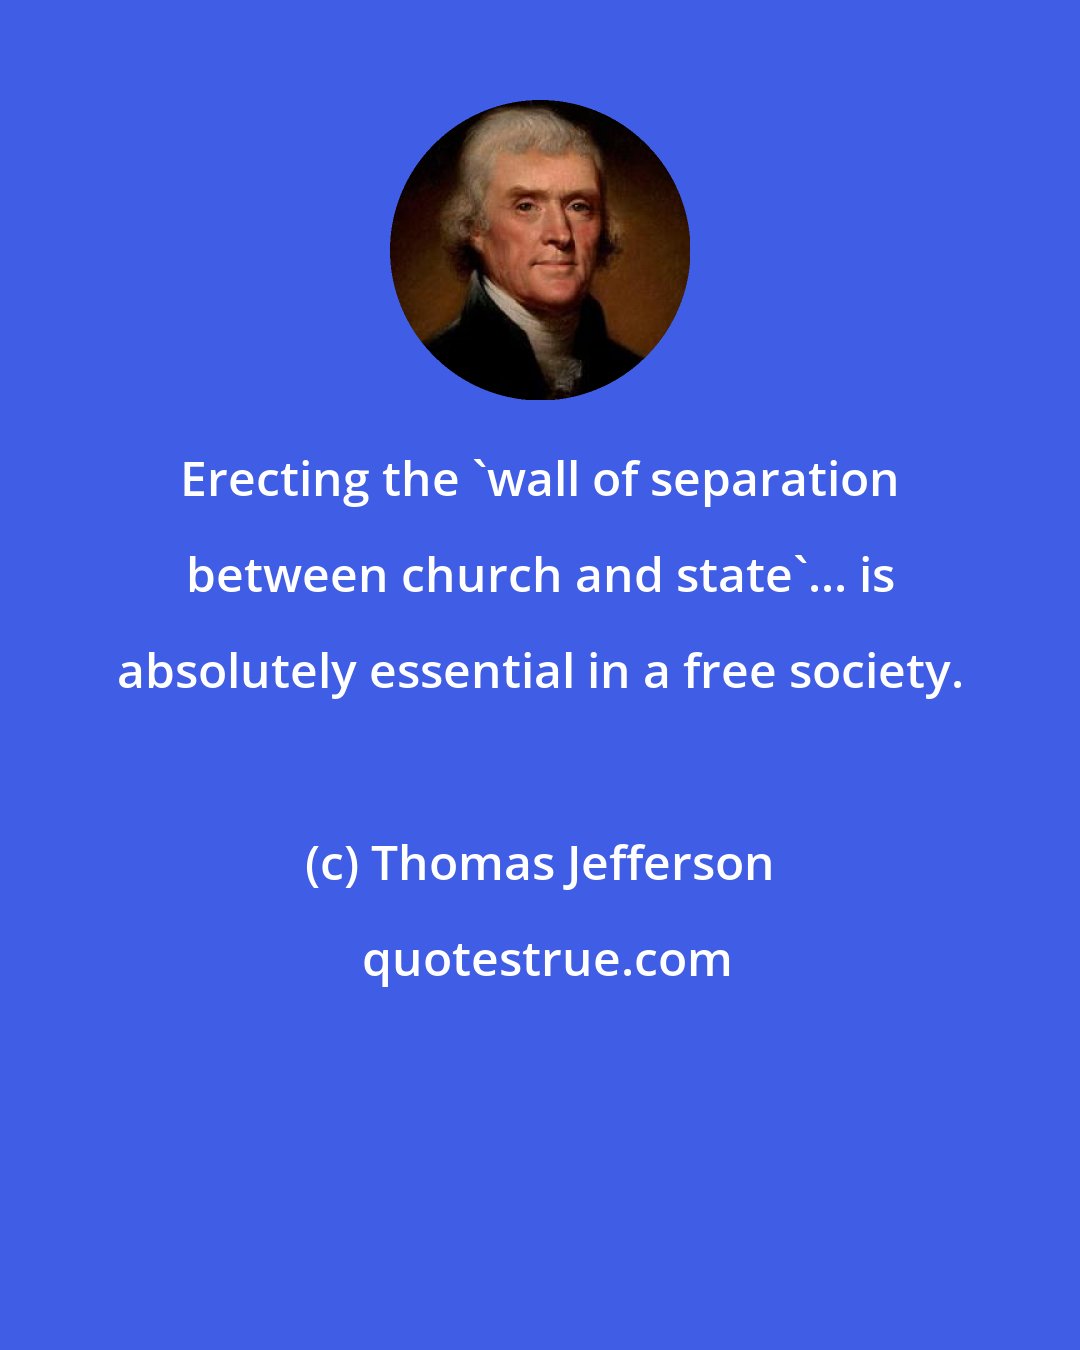 Thomas Jefferson: Erecting the 'wall of separation between church and state'... is absolutely essential in a free society.